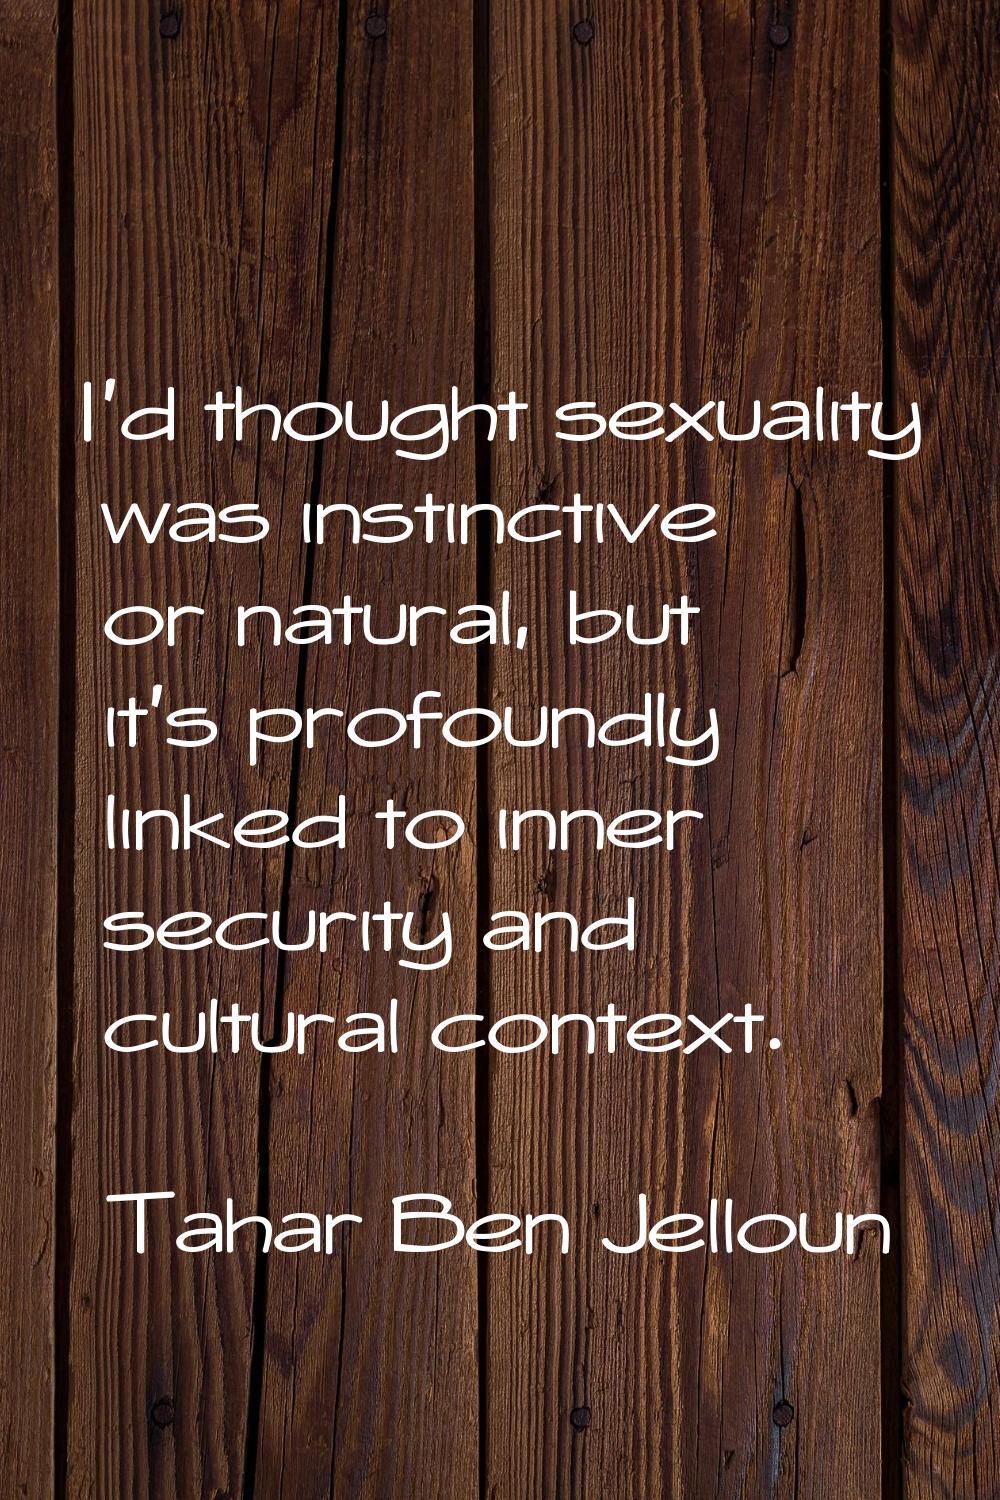 I'd thought sexuality was instinctive or natural, but it's profoundly linked to inner security and 